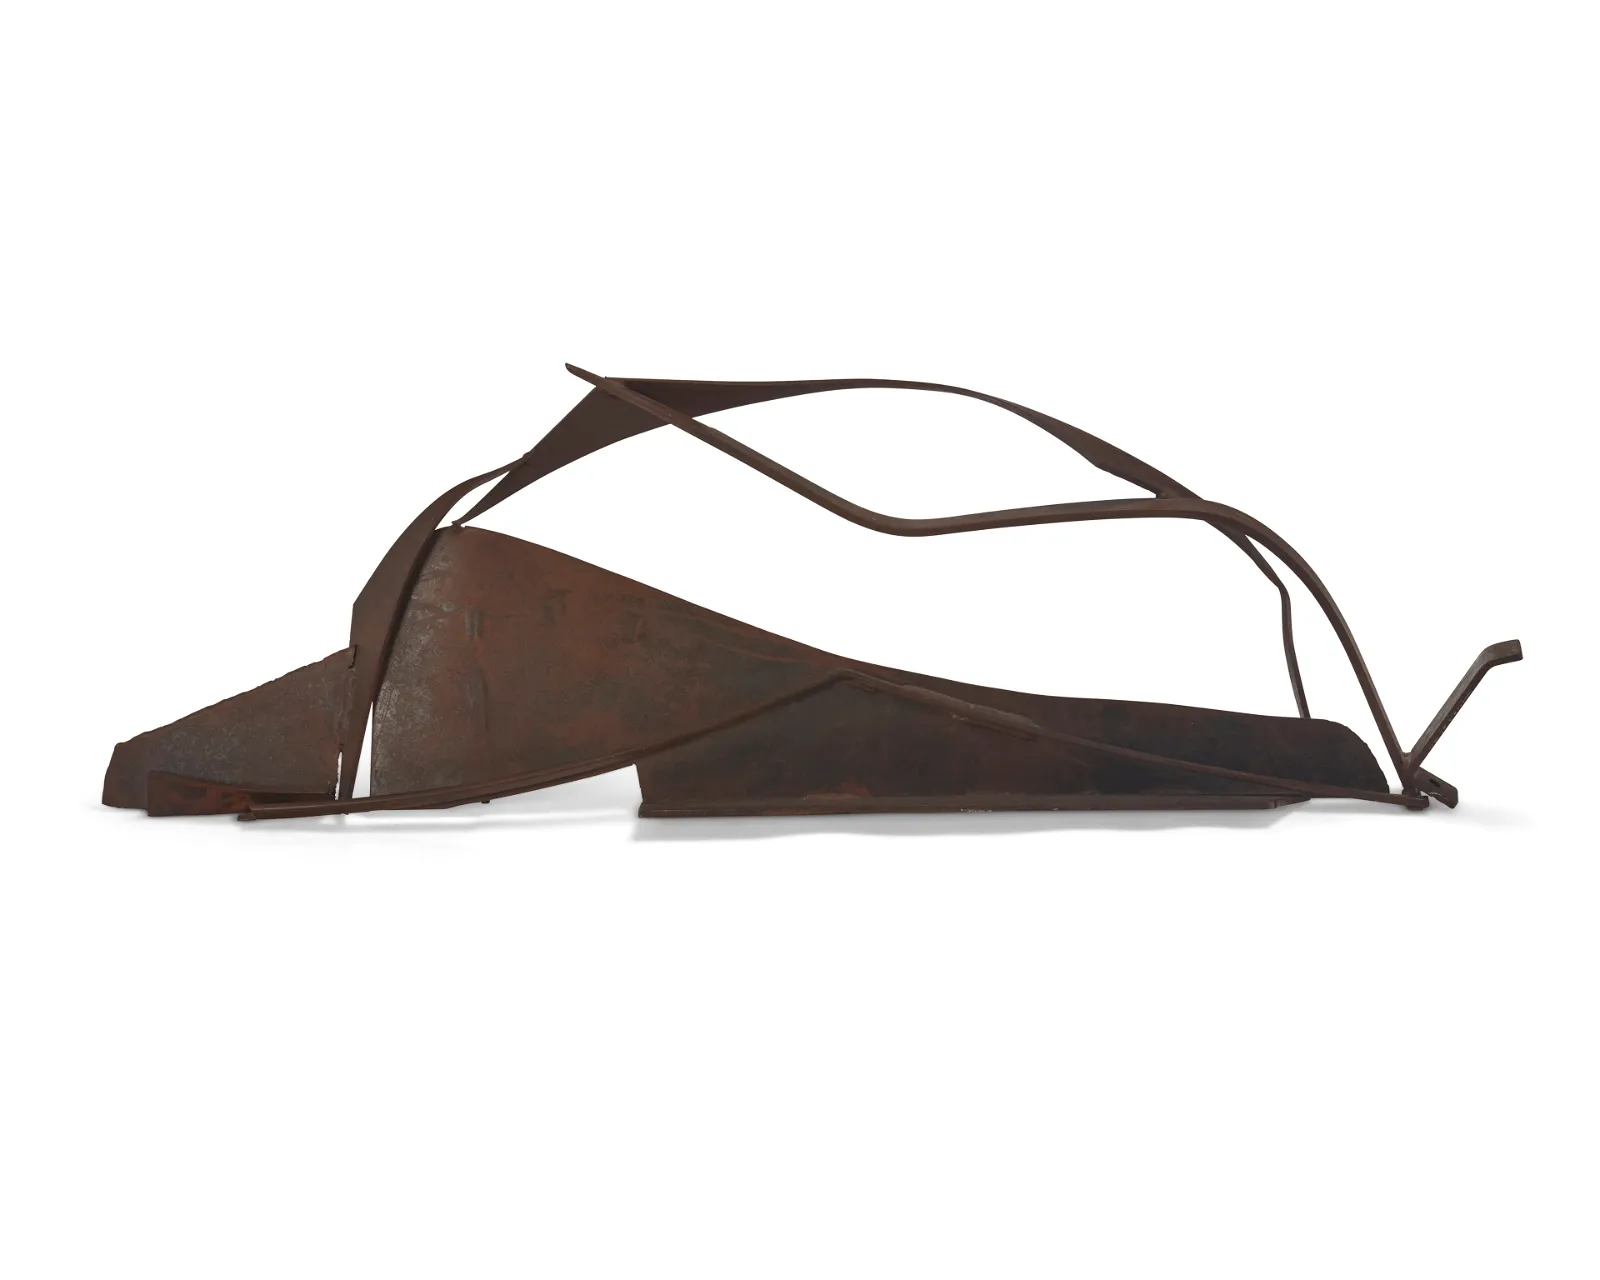 Sir Anthony Alfred Caro, 'Table Piece CCCLXXIII,' estimated at $40,000-$60,000 at Moran.